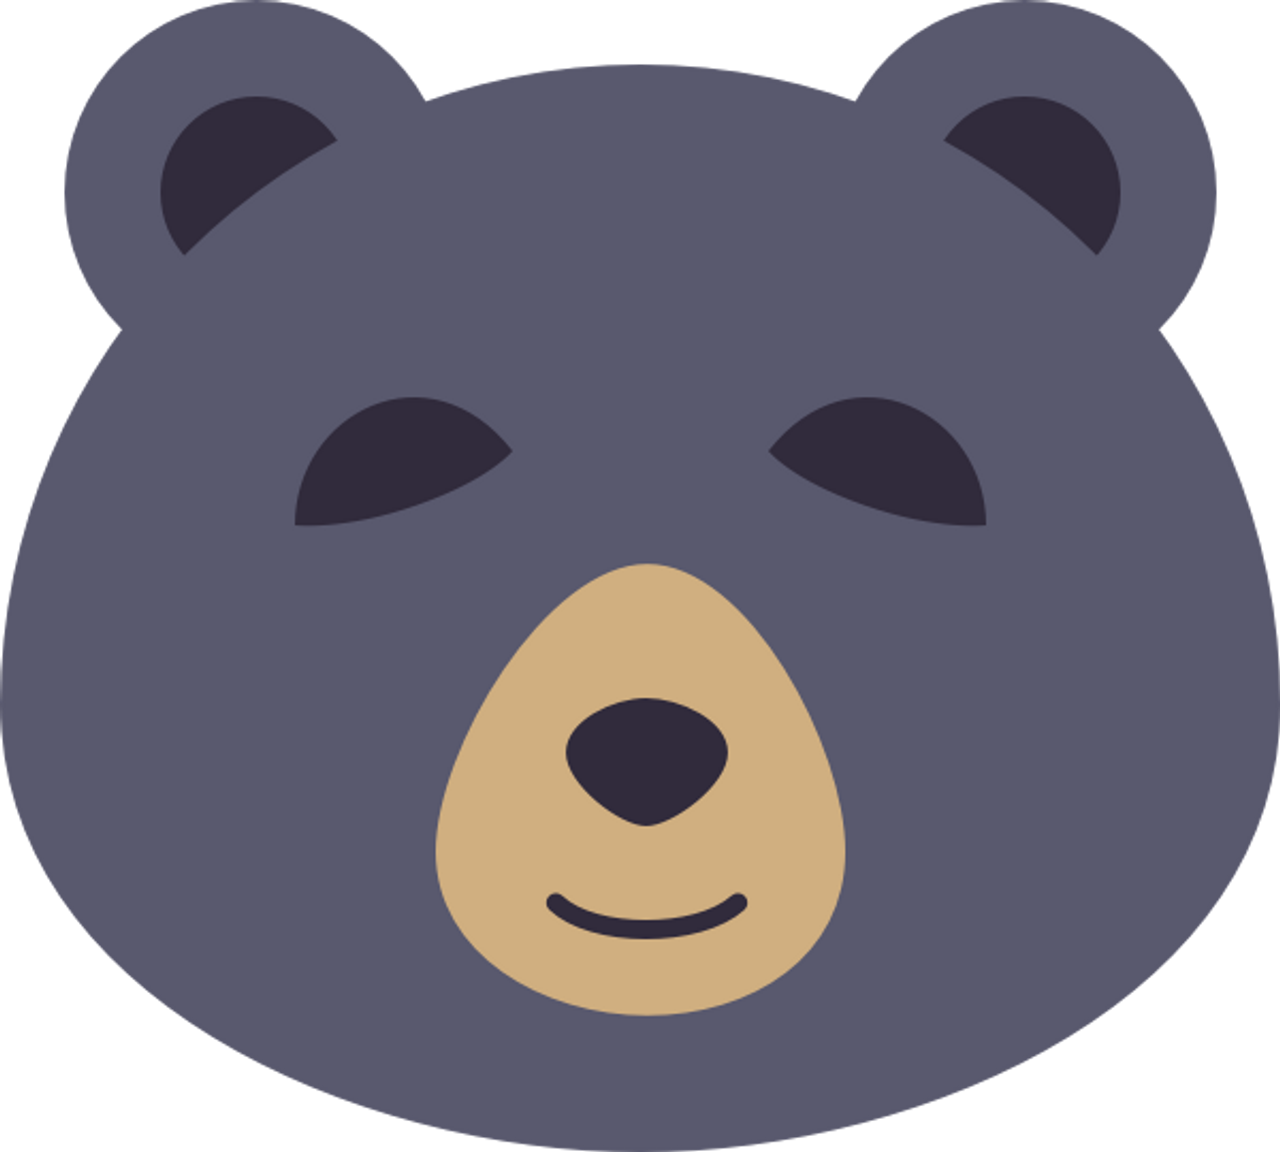 The new and improved, and current, PlanBear logo